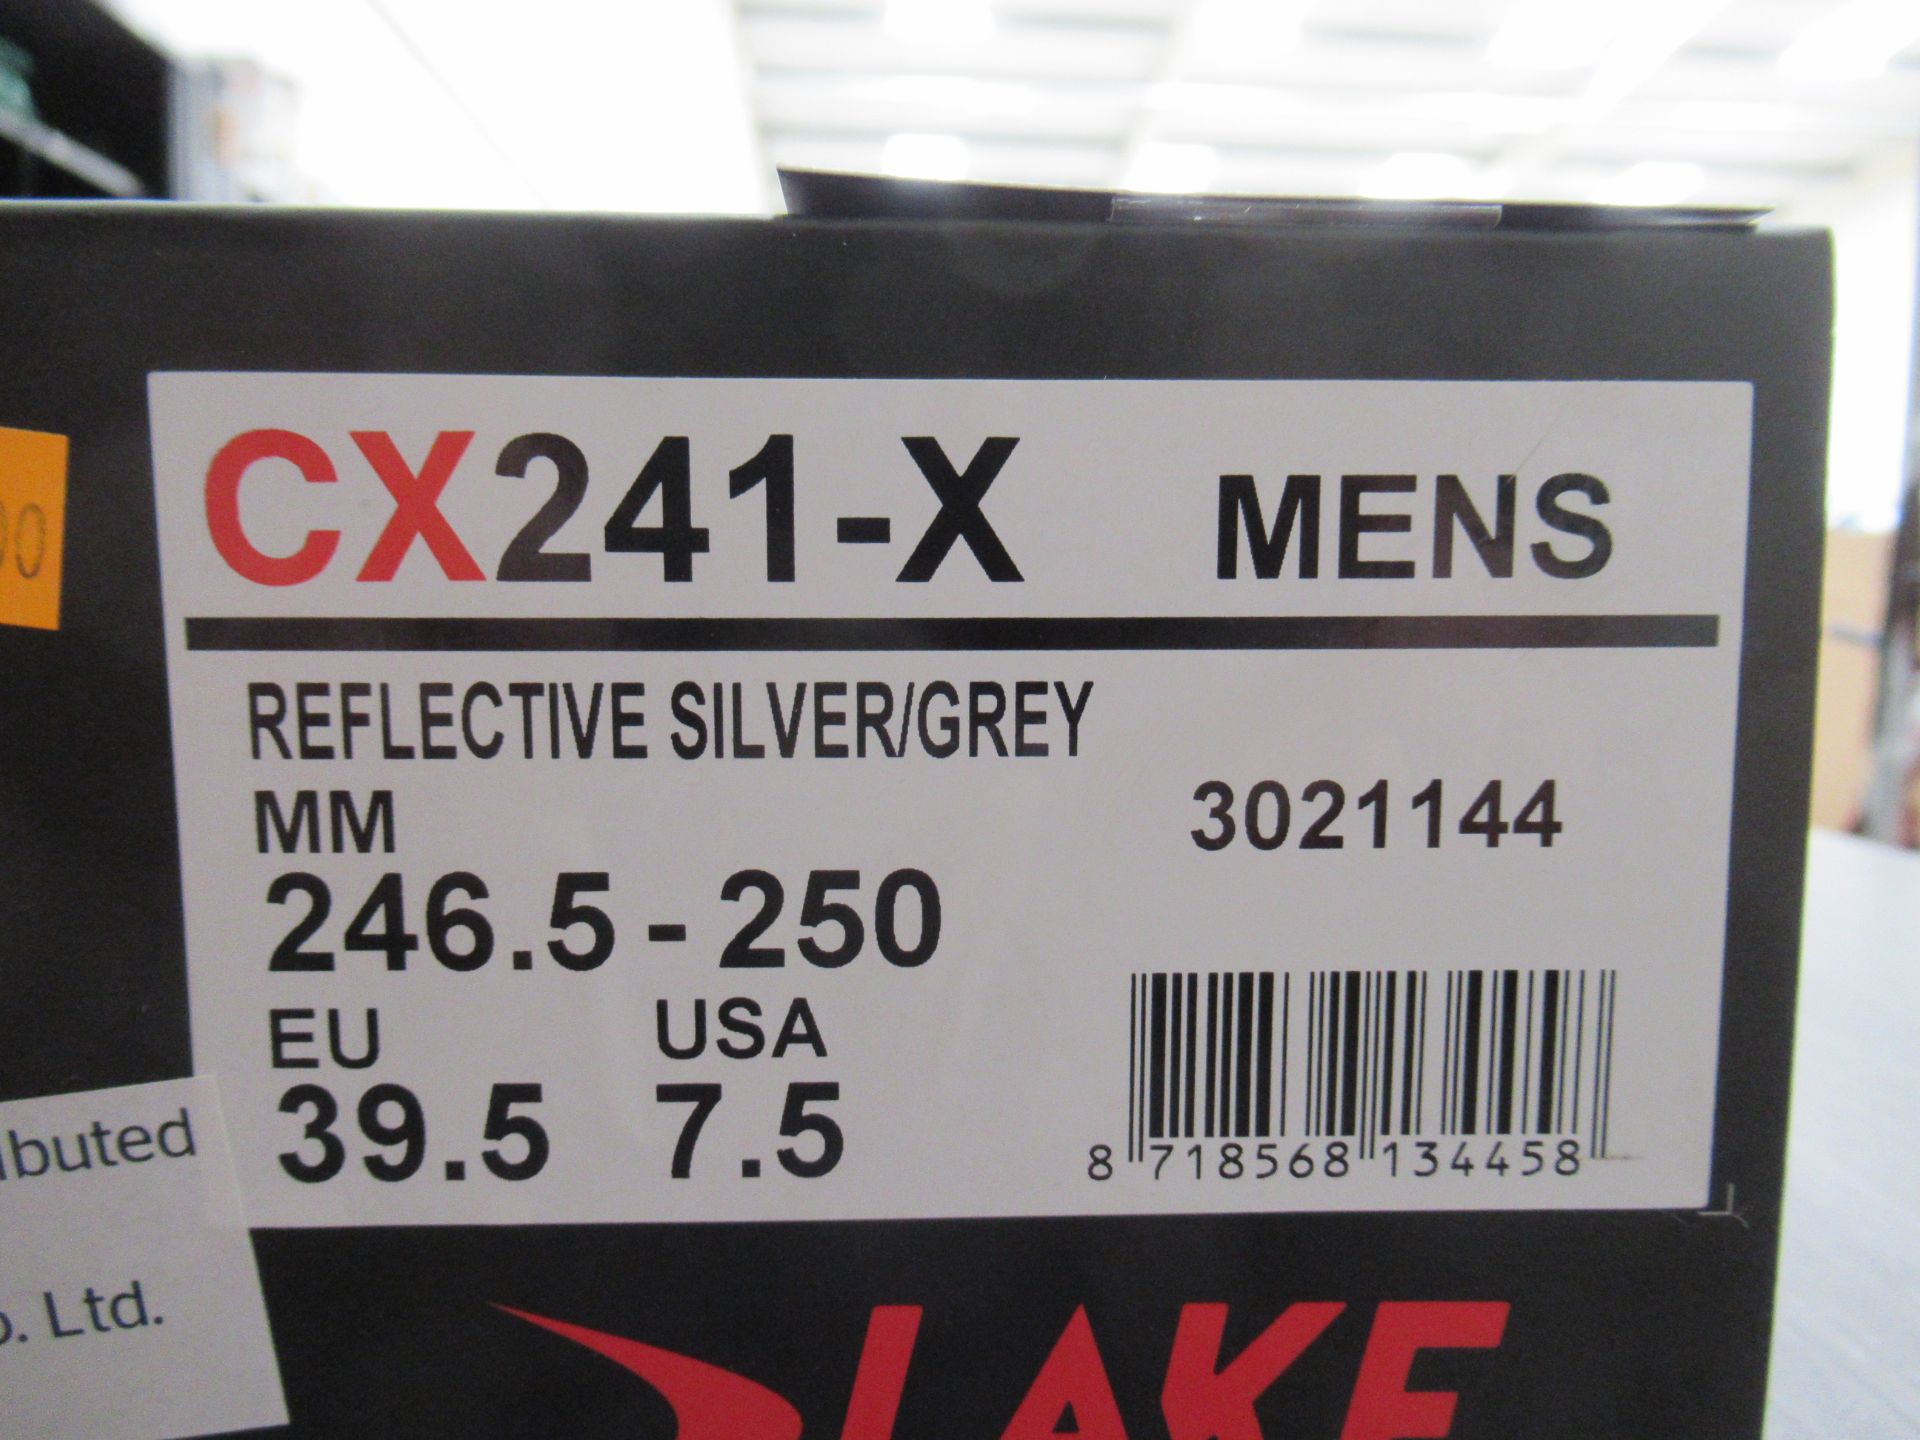 Pair of Lake CX241-X cycling shoes (reflective silver/grey) - boxed EU size 39.5 (RRP£295) - Image 3 of 4